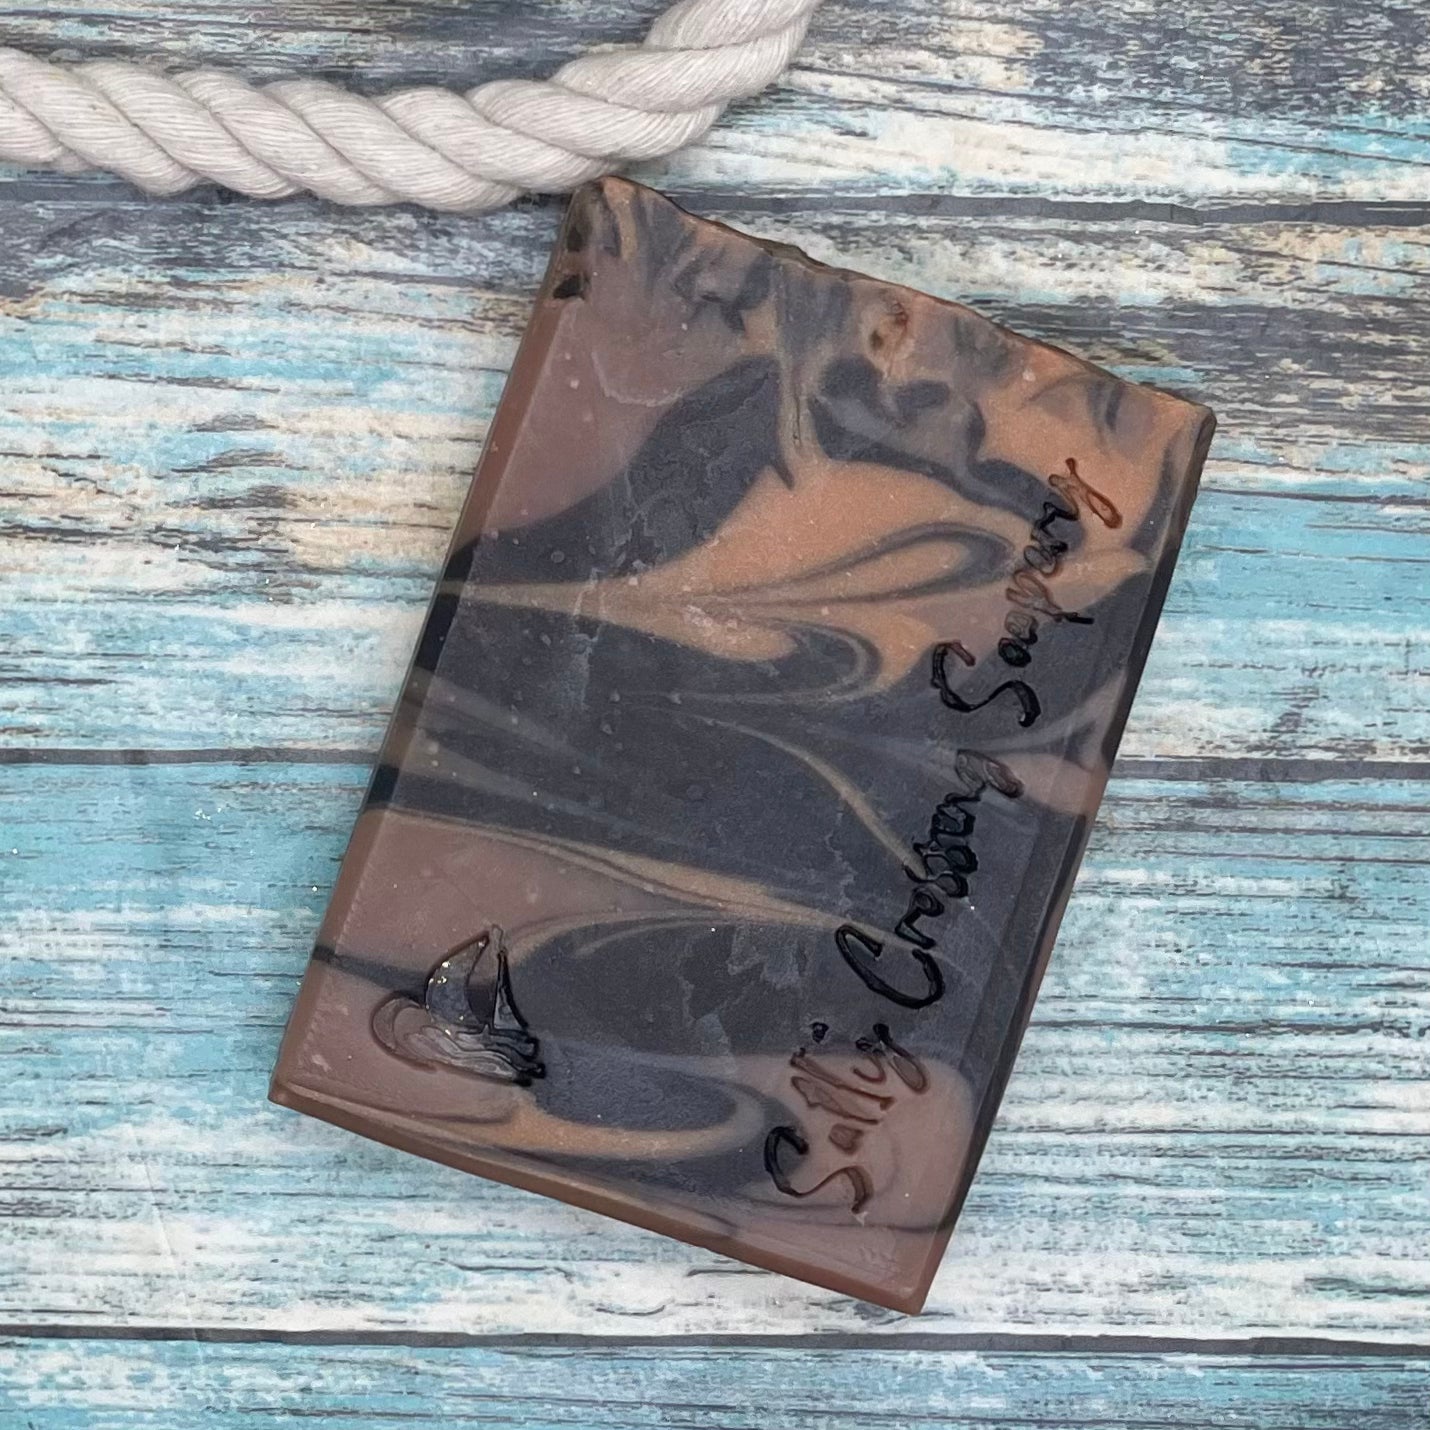 Smokin jack soap for men. Close up of a bar which is swirled in 3 shades of brown, then handstamped with a small sailboat graphic and the text Salty Crossing Soapery